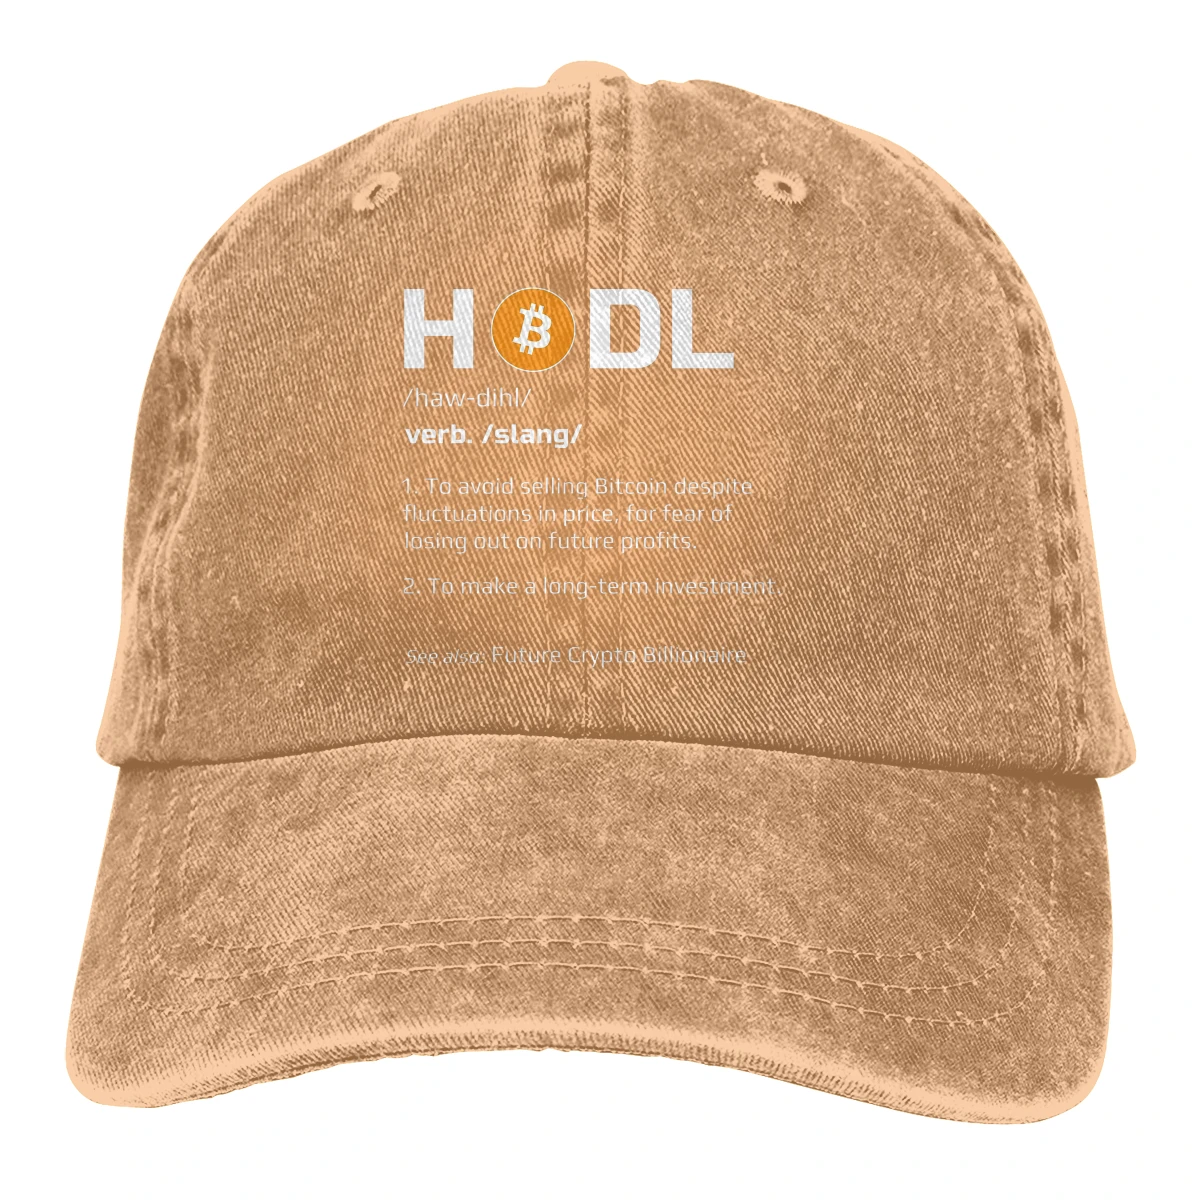 

2020 Best Selling Summer Cap Sun Visor HODL Definition Hip Hop Caps Bitcoin Cryptocurrency Miners Meme Cowboy Hat Peaked Hats